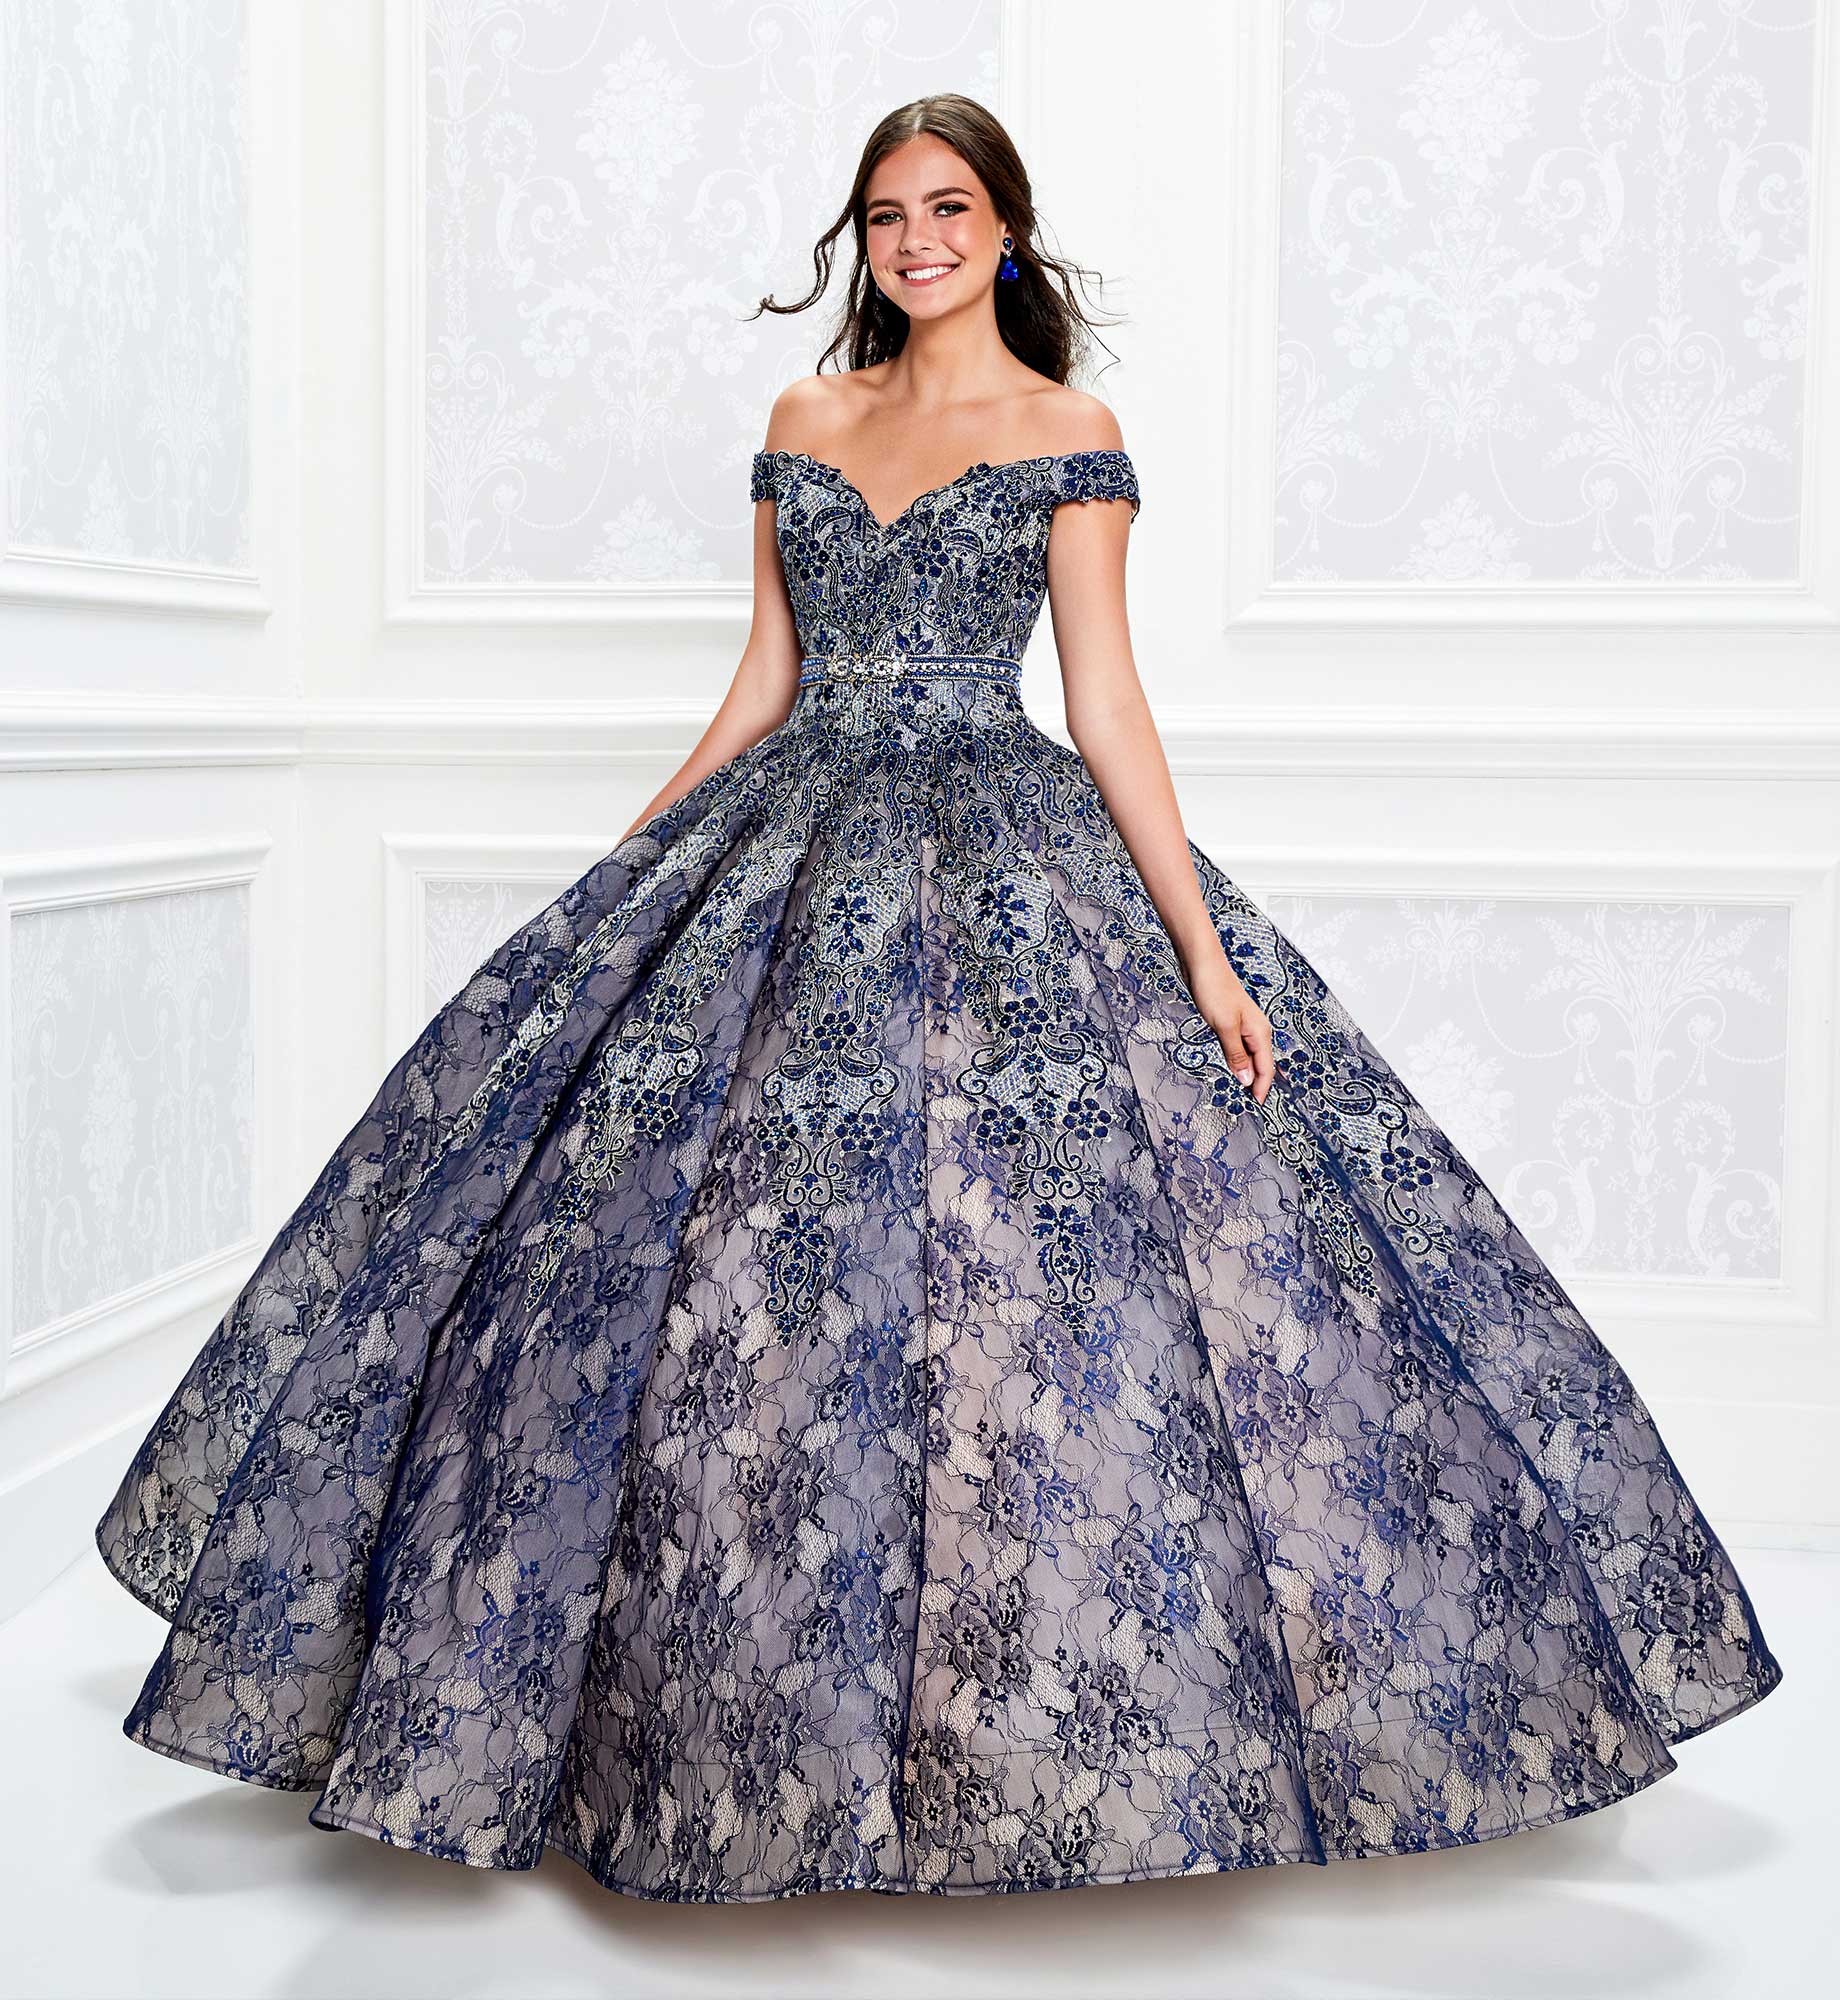 Striking quinceanera dress with off the shoulder bodice and beaded lace